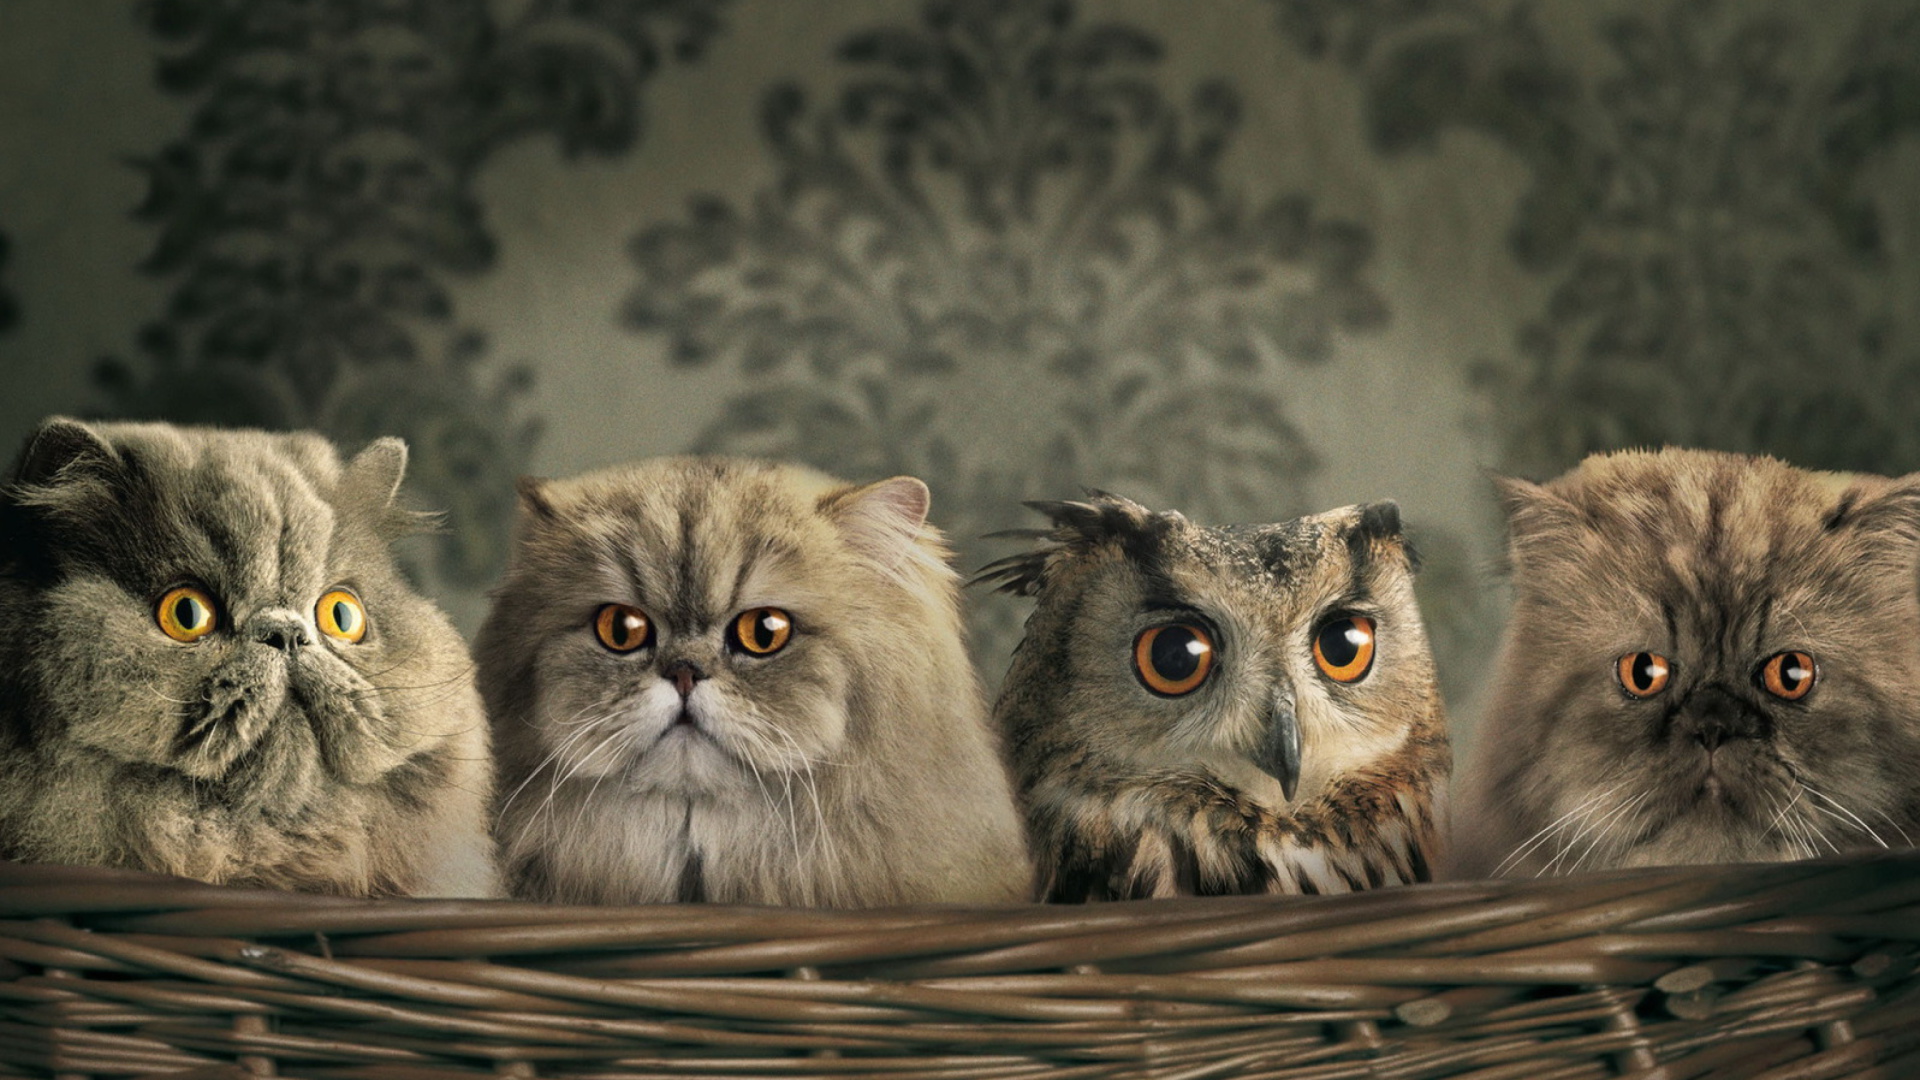 Cats and Owl as Third Wheel wallpaper 1920x1080